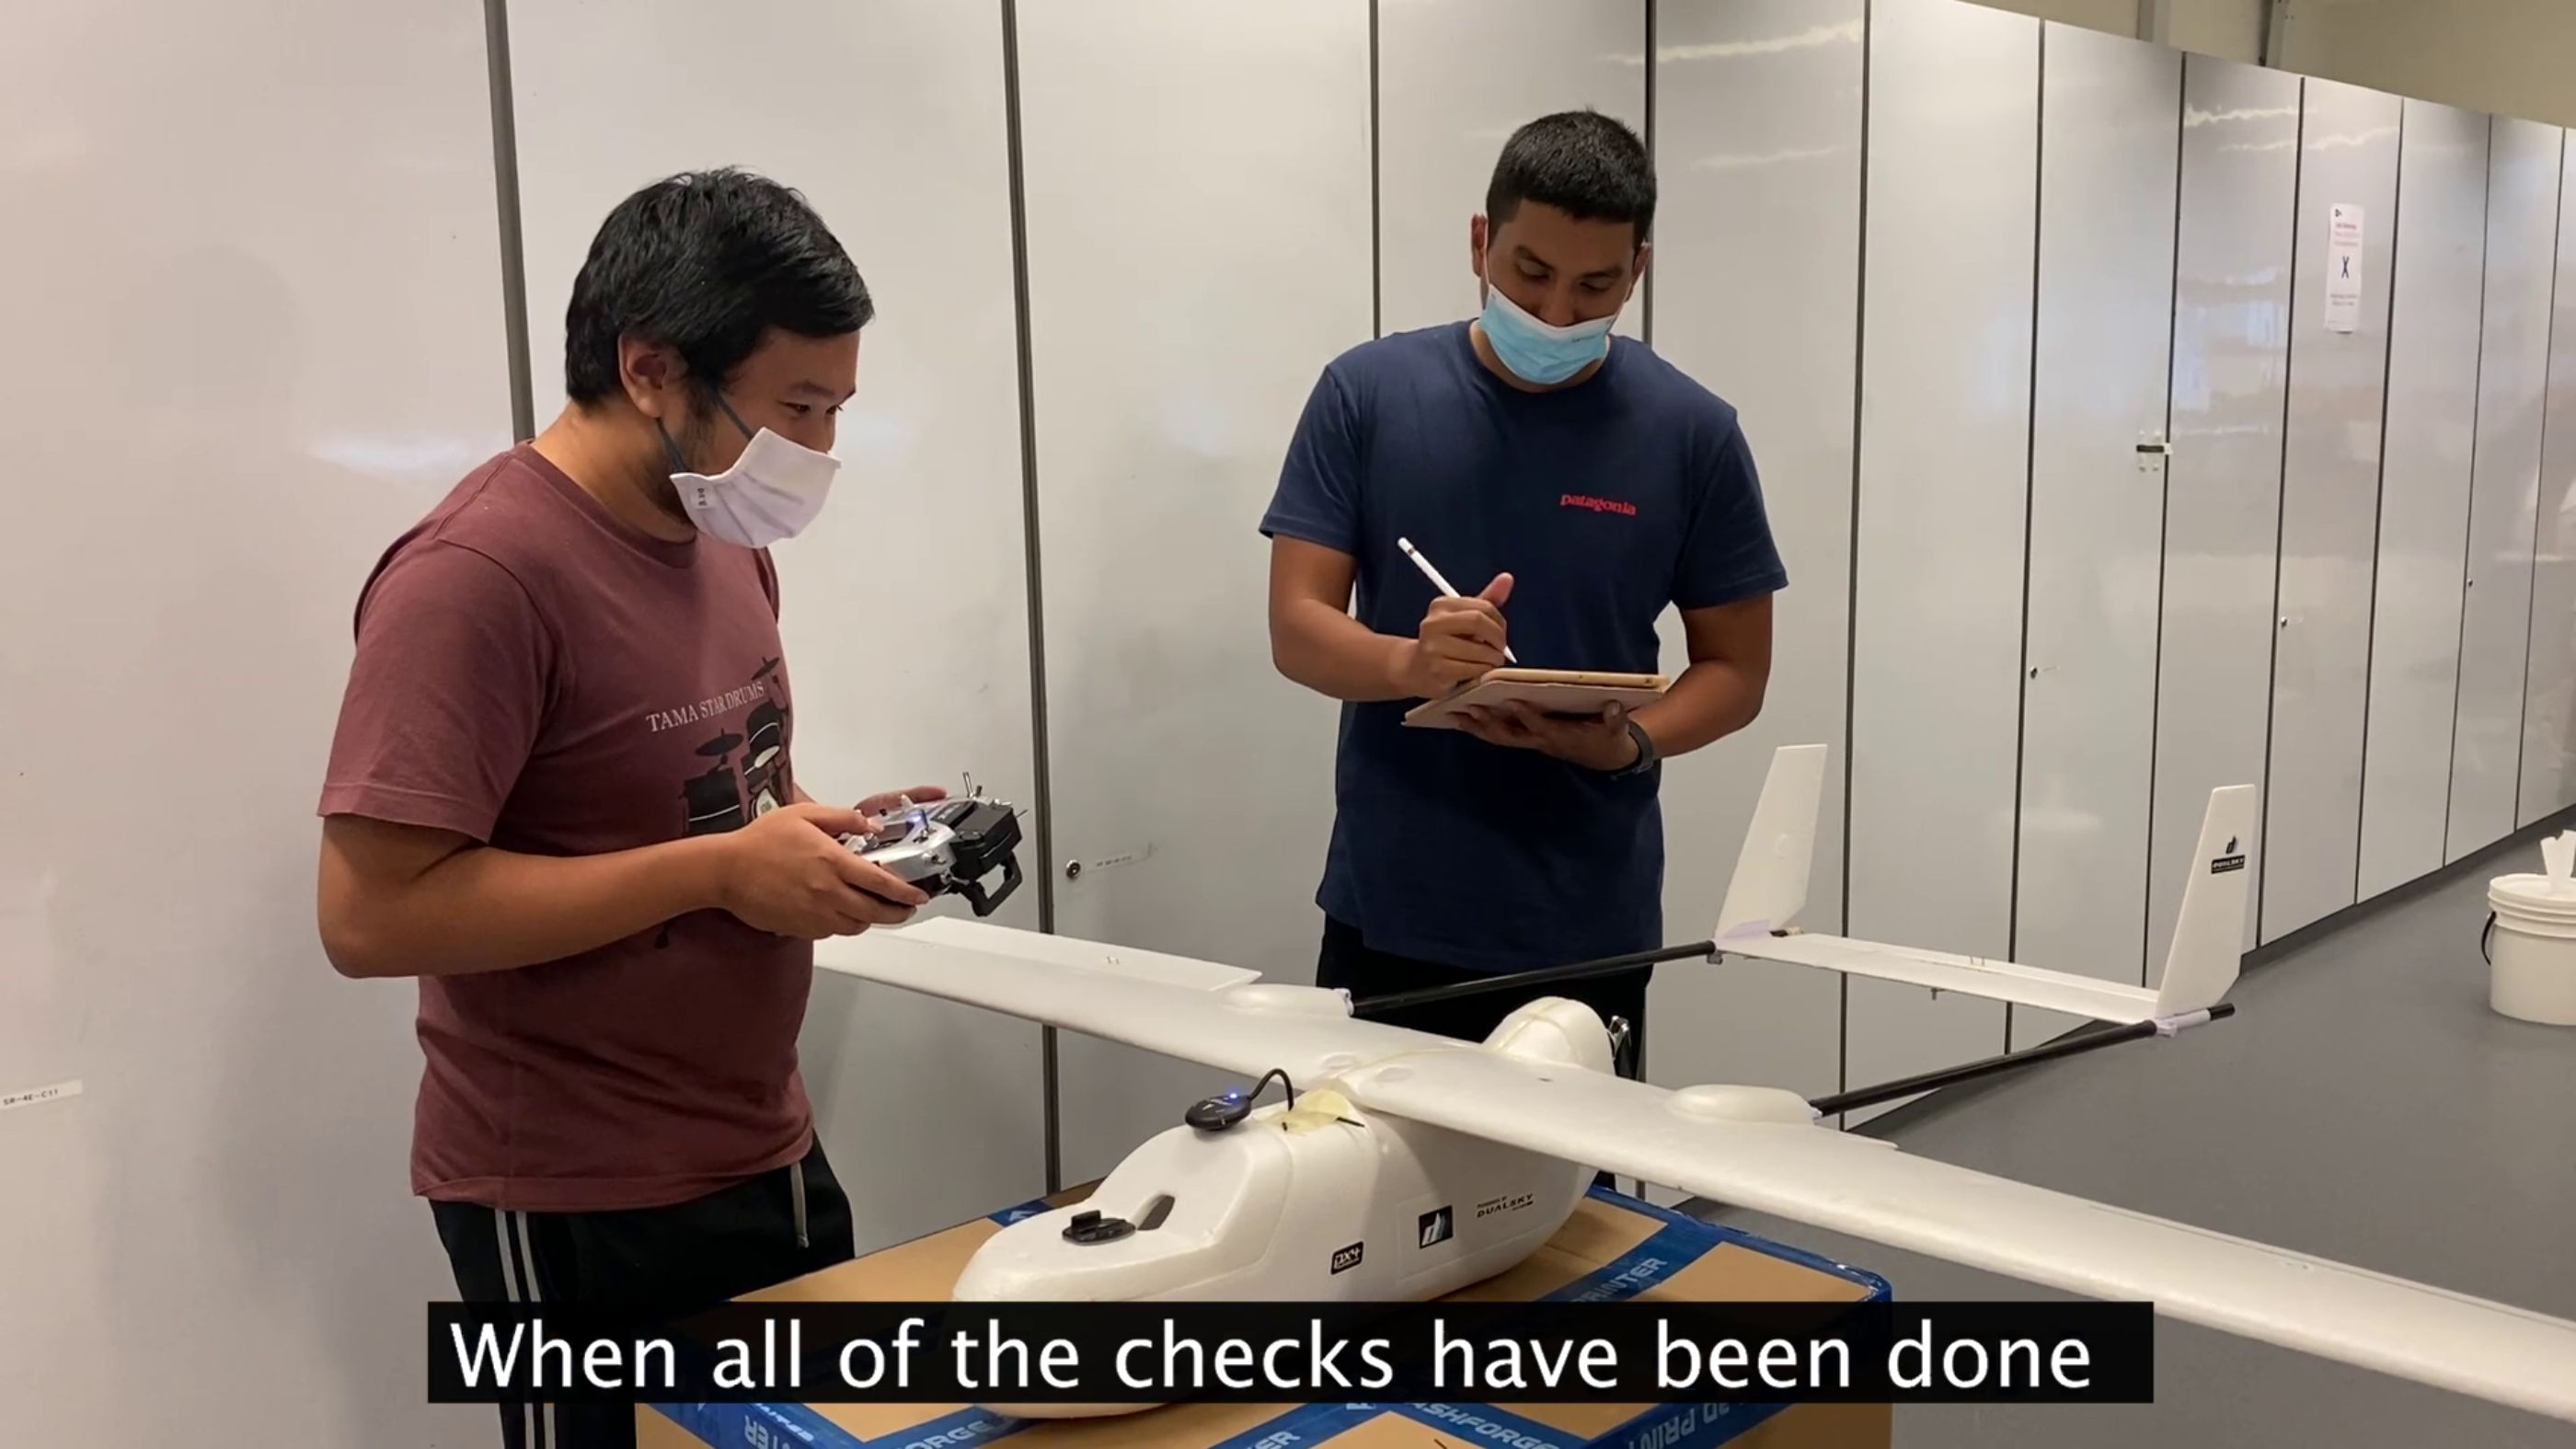 Two students stand next to a white drone while working on it